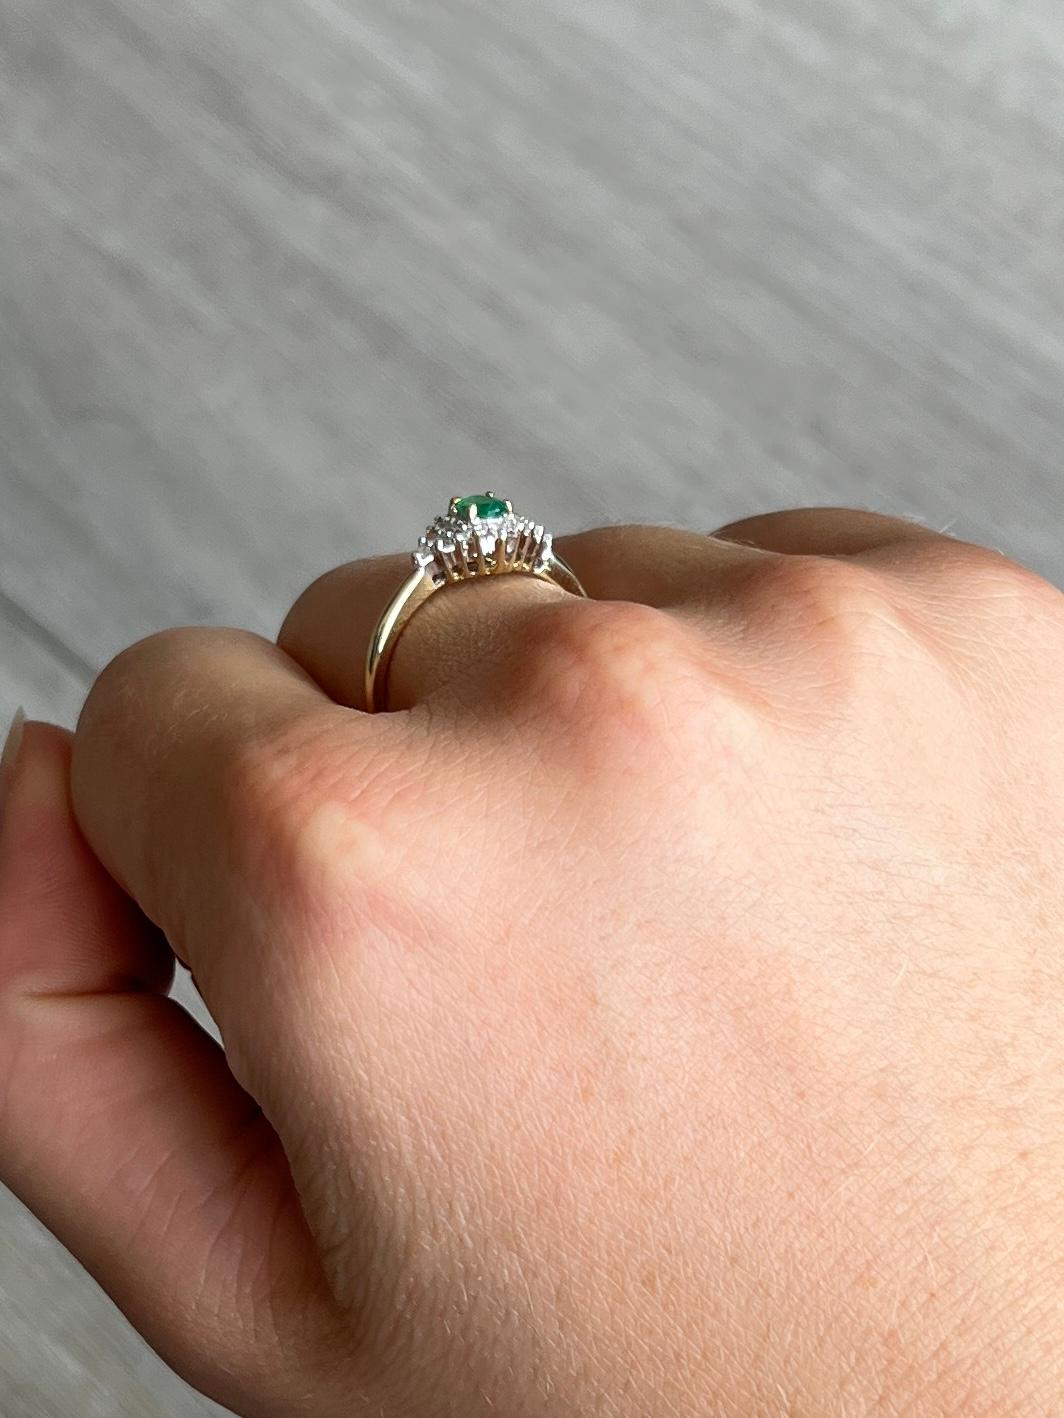 This stunning cluster boasts a 35pt emerald at the centre of it. Surrounding the beautiful green stone are diamonds totalling 28pts. All modelled in 9carat gold and stones set in platinum. 

Ring Size: N 1/2 or 7
Cluster Dimensions: 11x7mm

Weight: